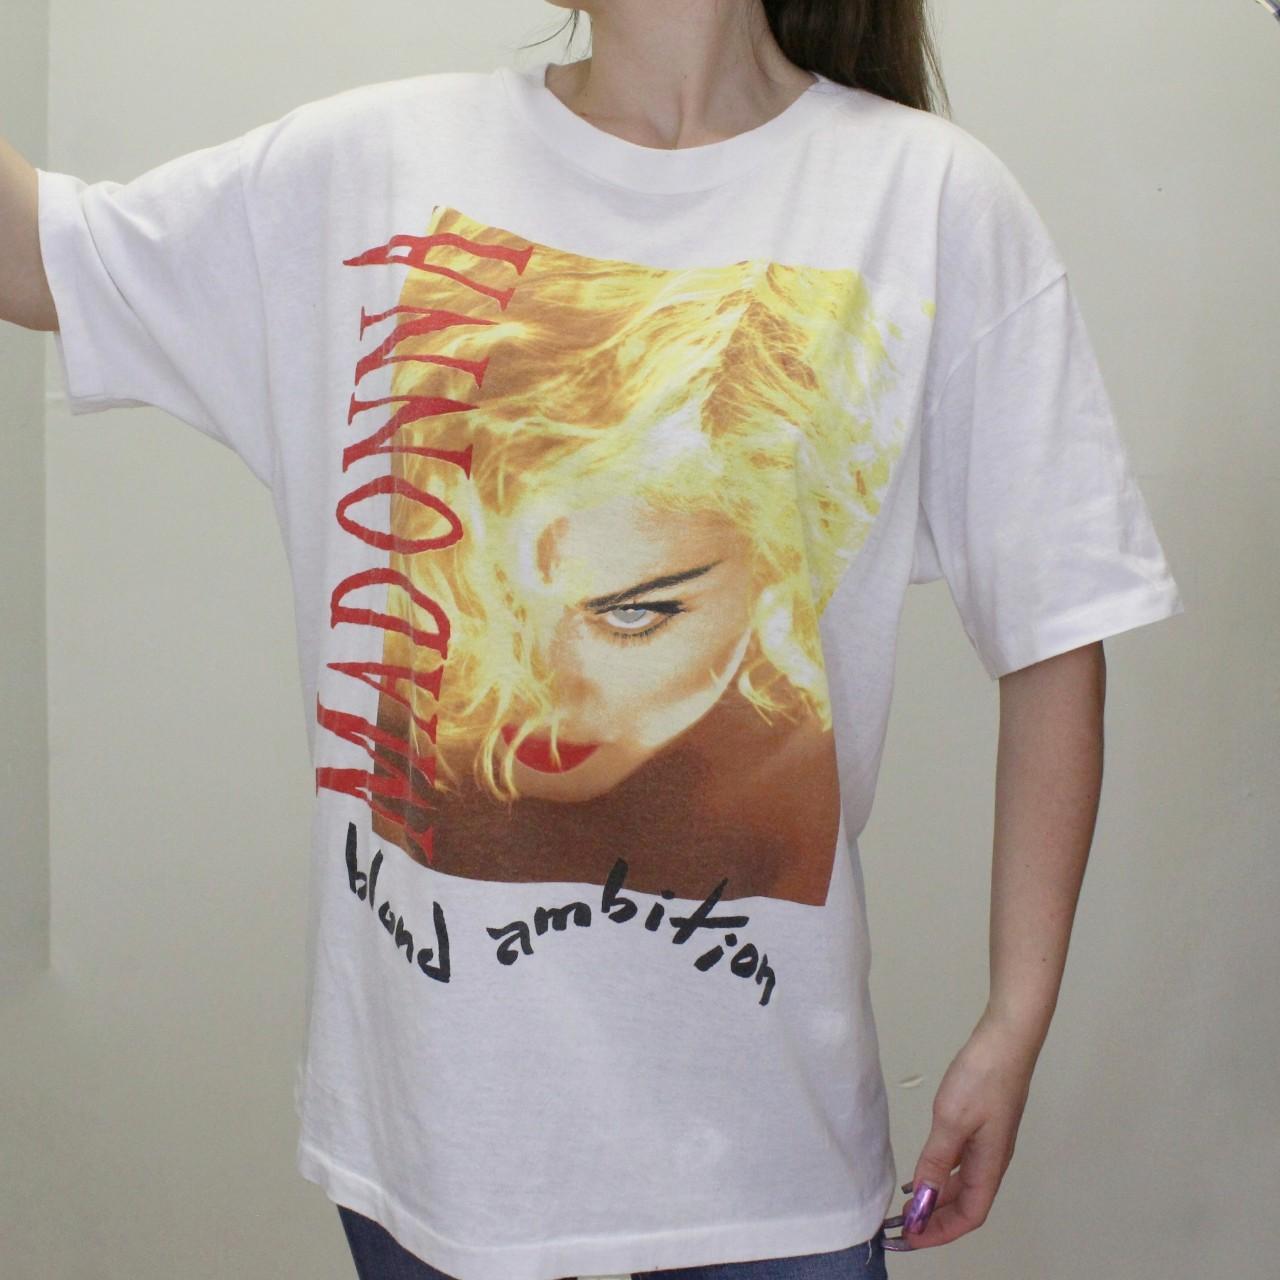 Vintage 90s Madonna Blond Ambition World Tour Tee by...